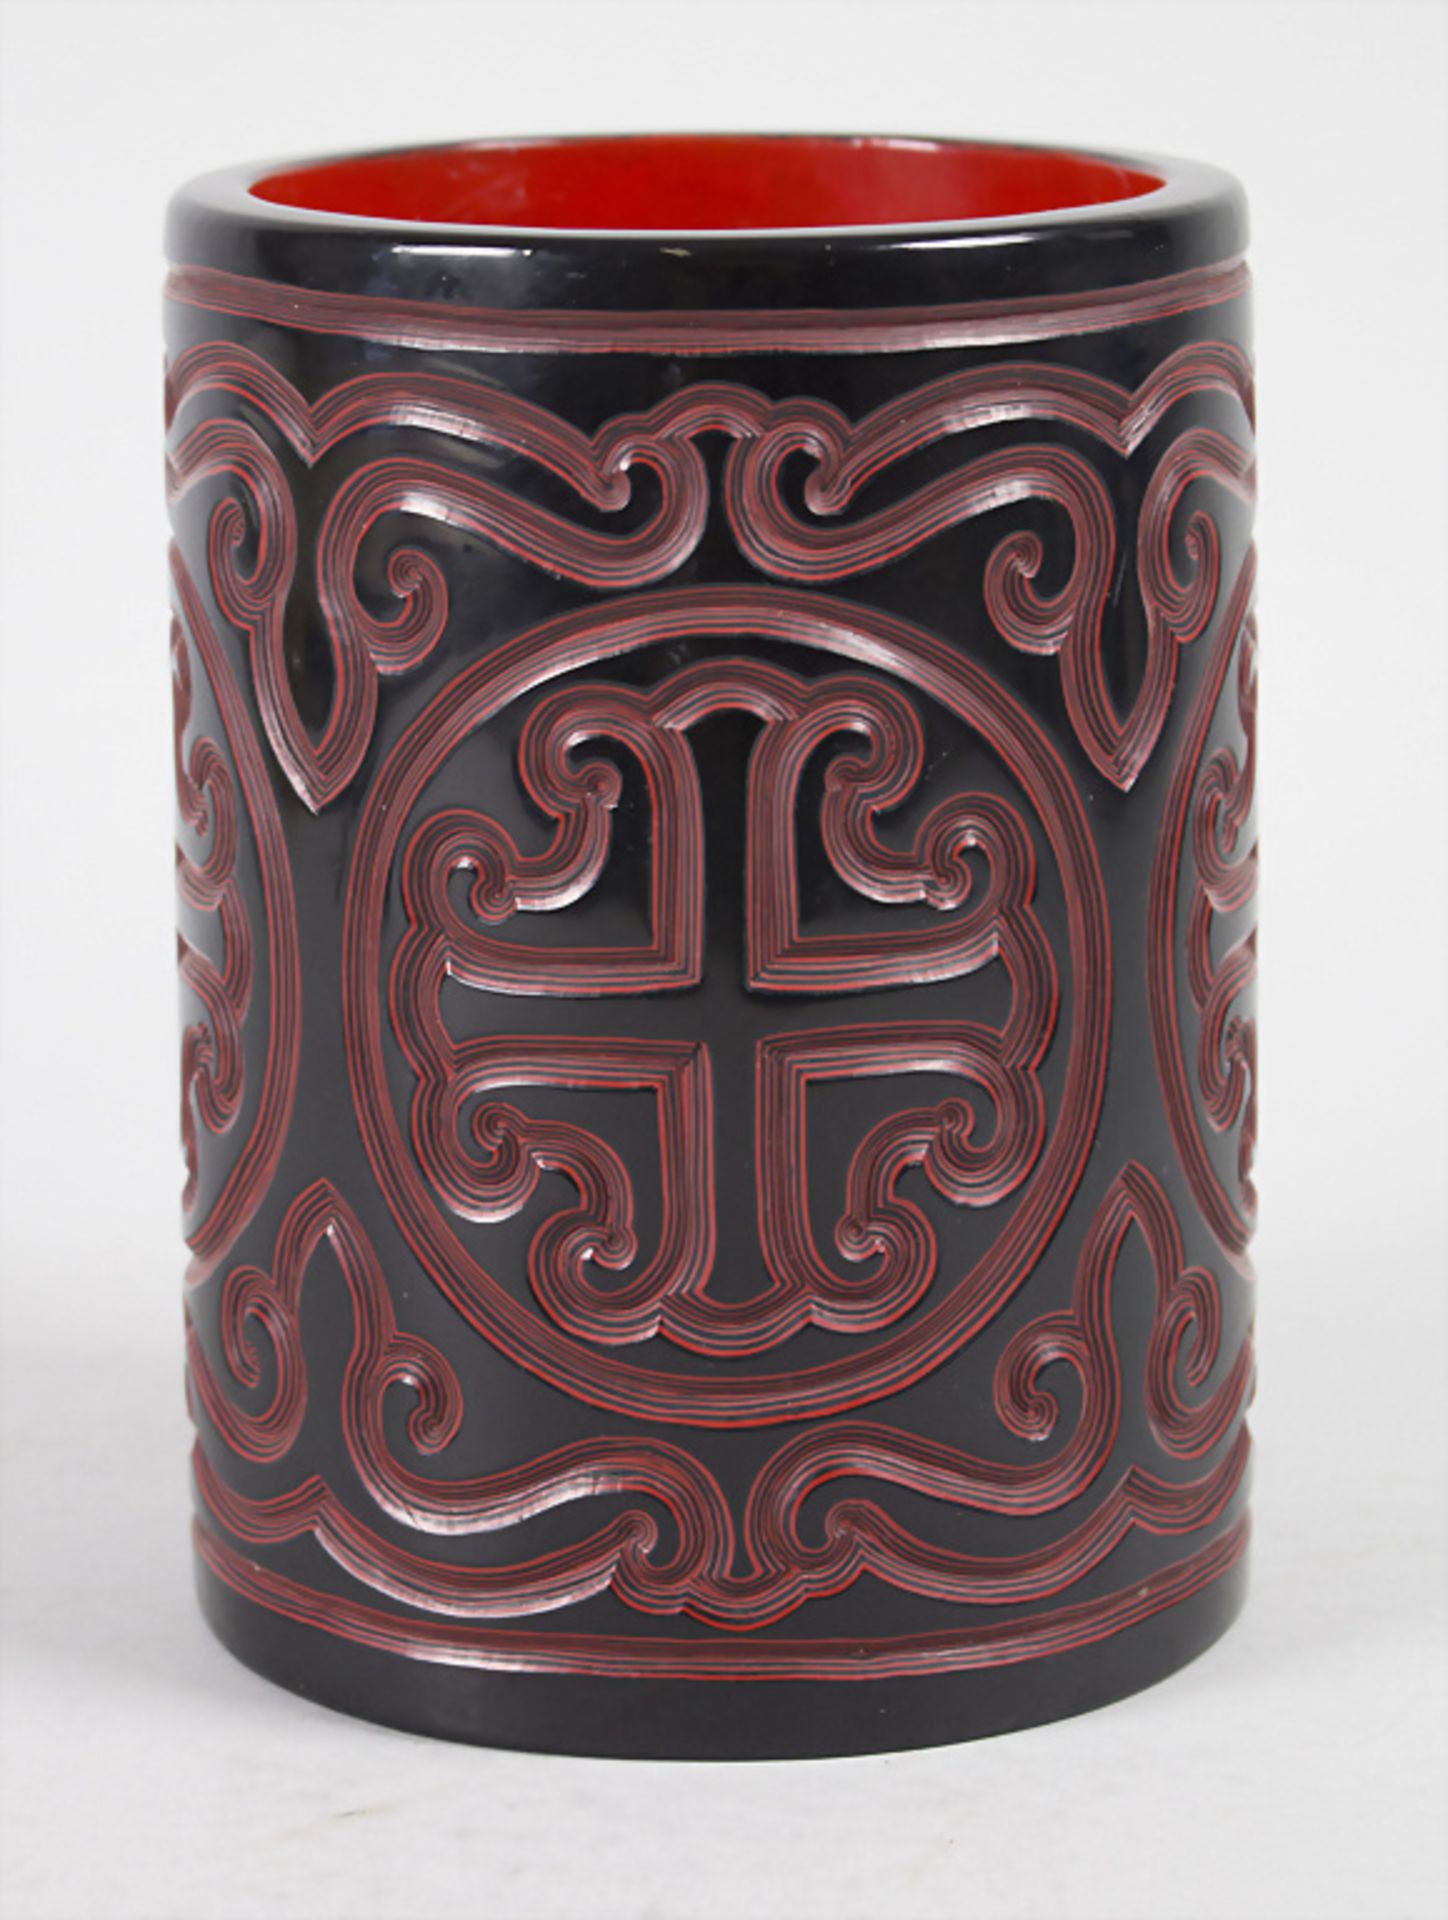 Schichtlack Pinselbecher / A brush cup with layers of lacquer, China, späte Qing Dynastie ...